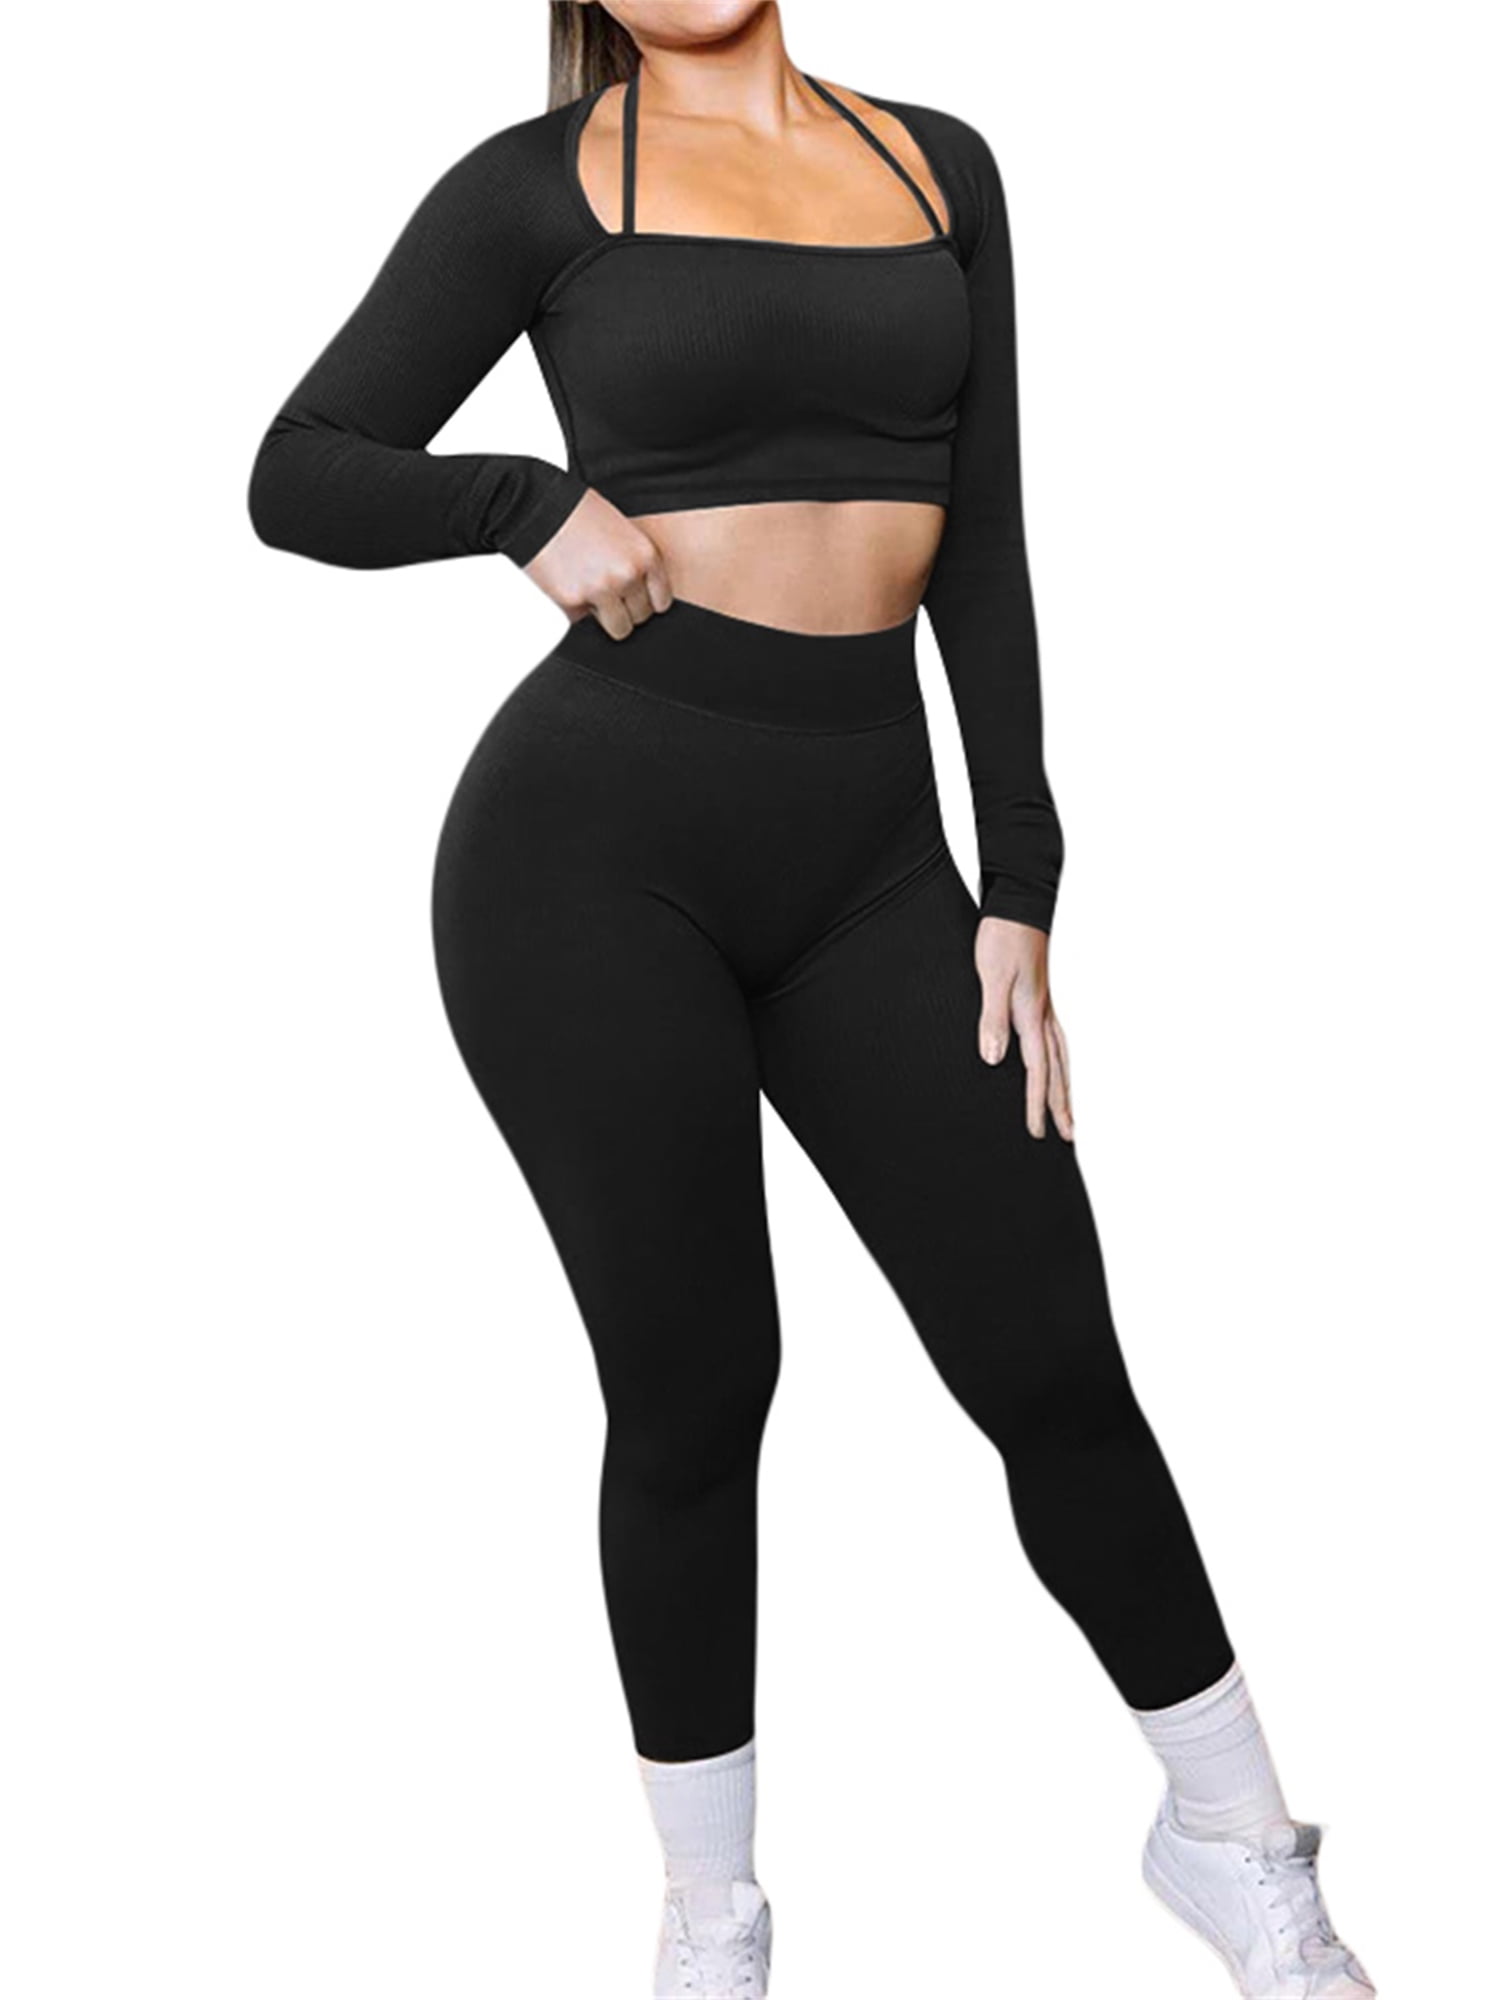 Buy GXIN Women's Workout 2 Piece Outfits Seamless Sexy Yoga Crop Tops Gym  High Waist Running Leggings Sets, Black, Large at